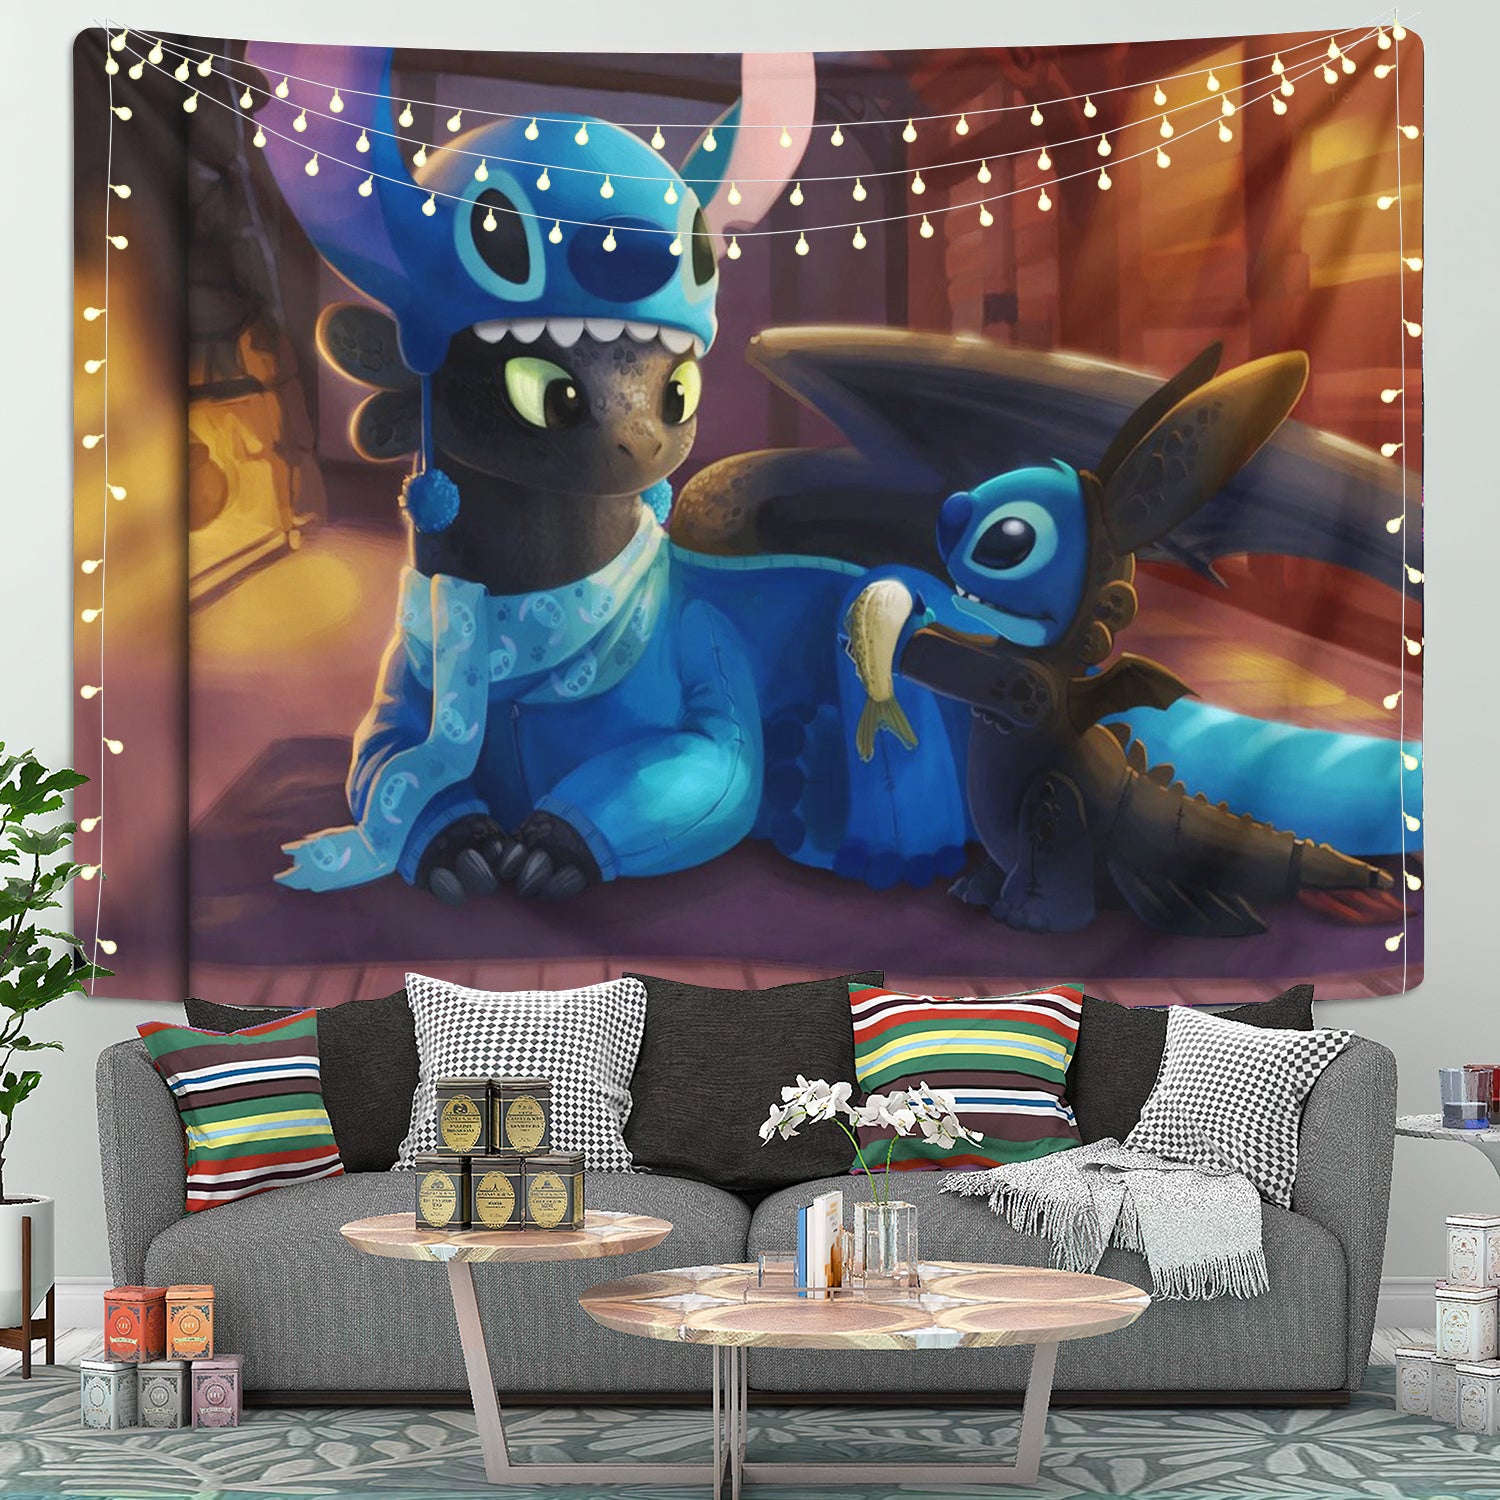 Stitch Toothless How To Train Your Dragon Tapestry Room Decor Nearkii